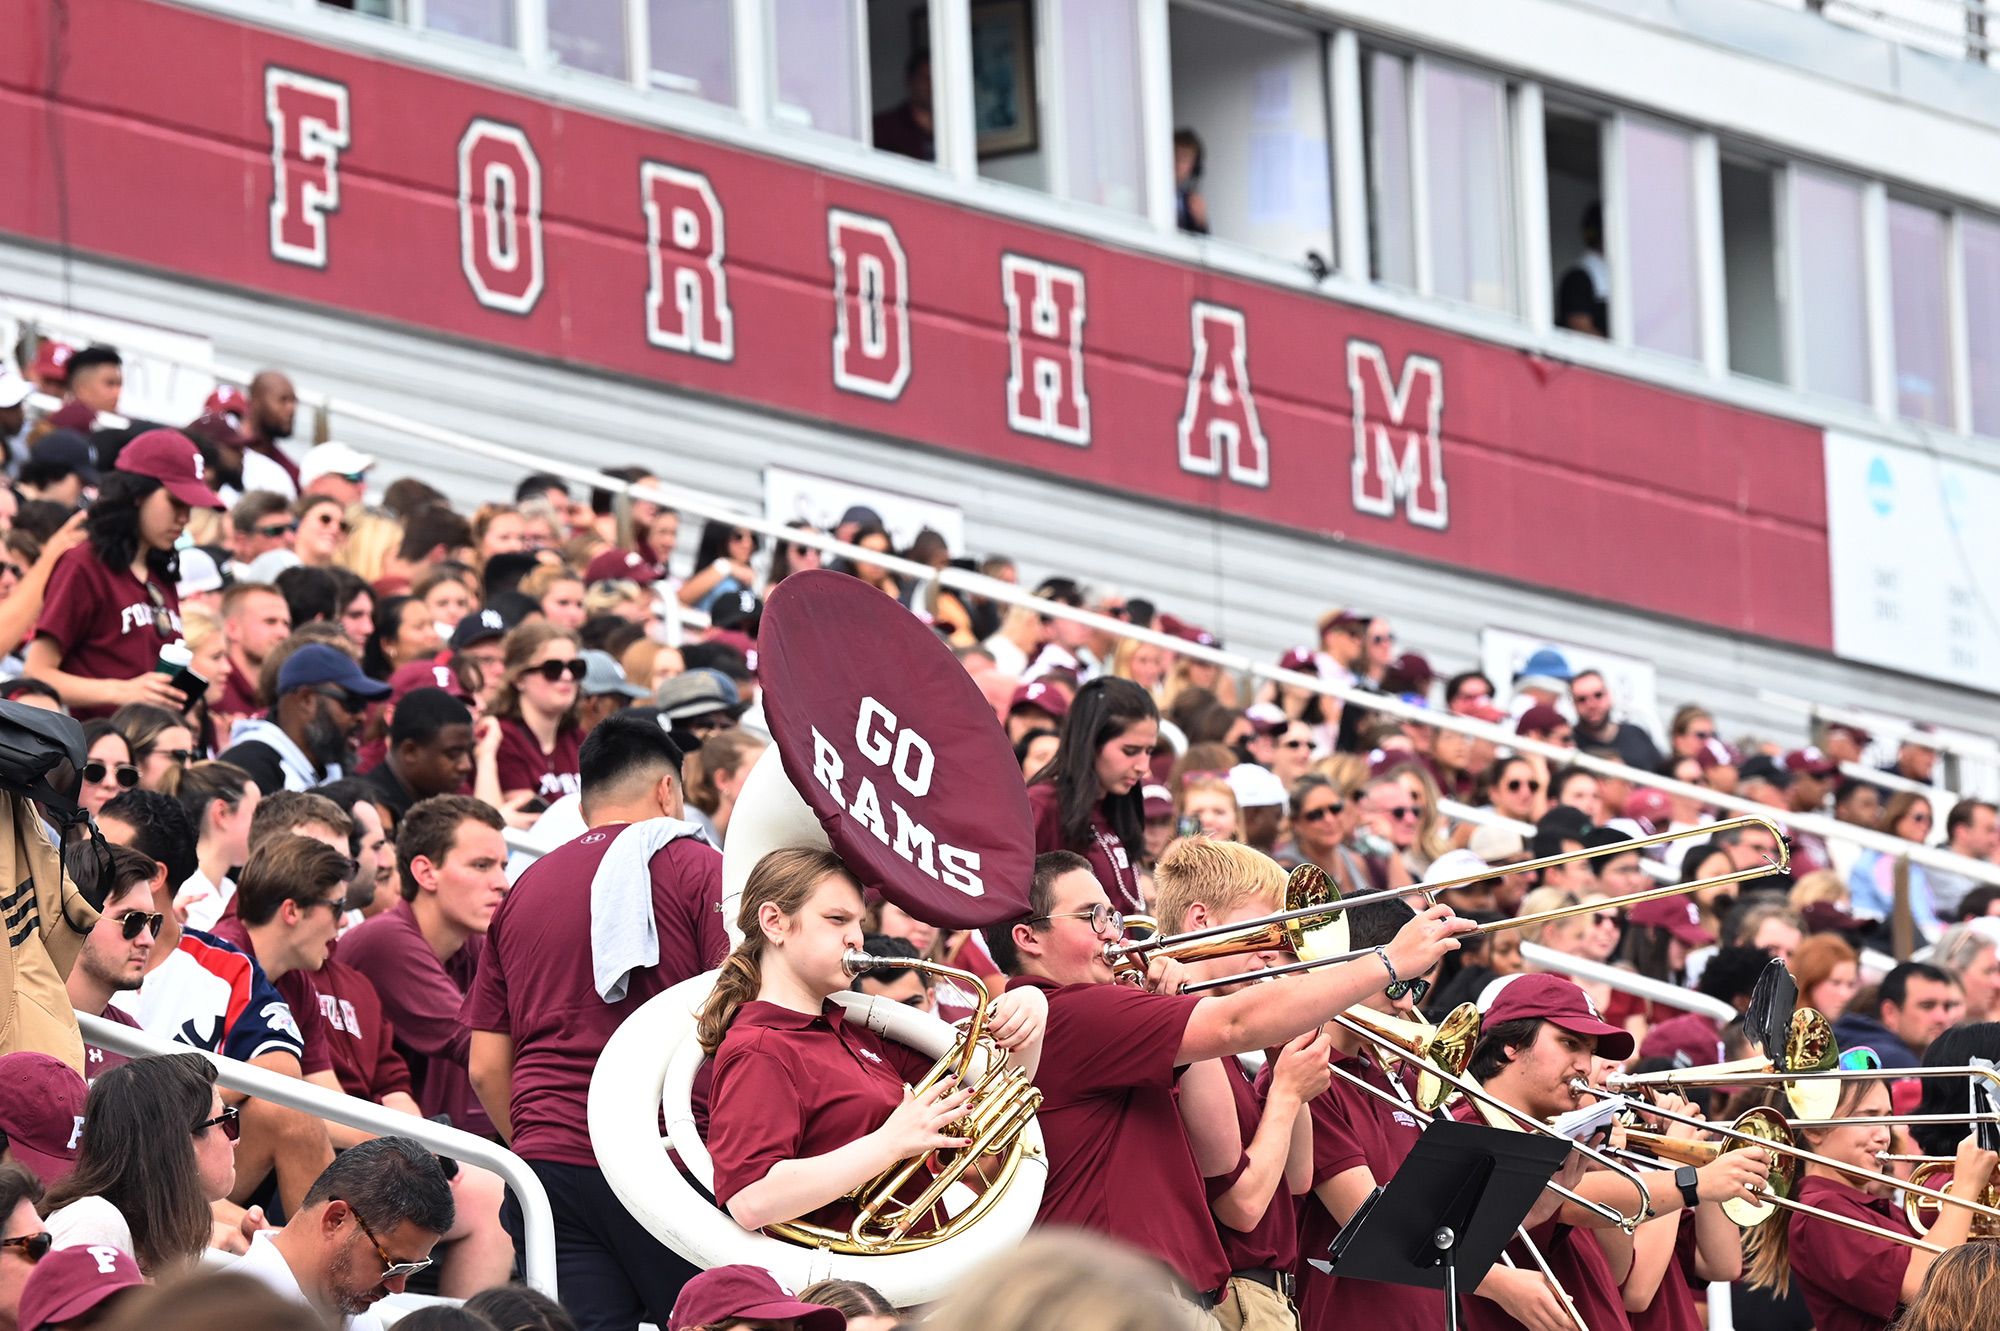 Fordham students and band members standing in the stands at a Fordham football game